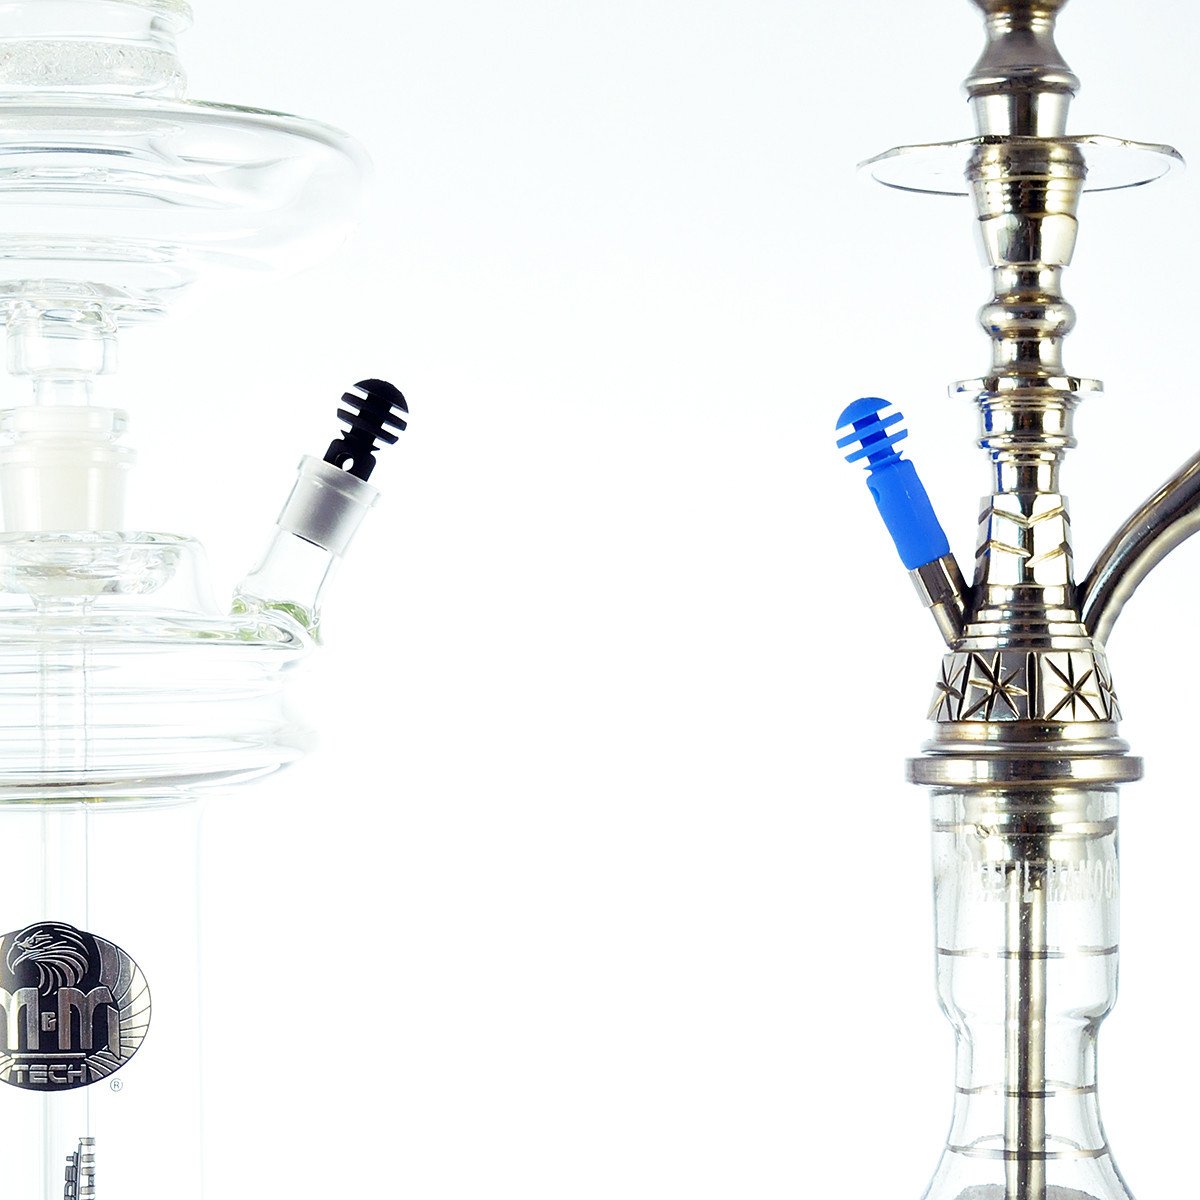 AOT Silicone Universal Purge Valve on glass and Egyptian hookah group